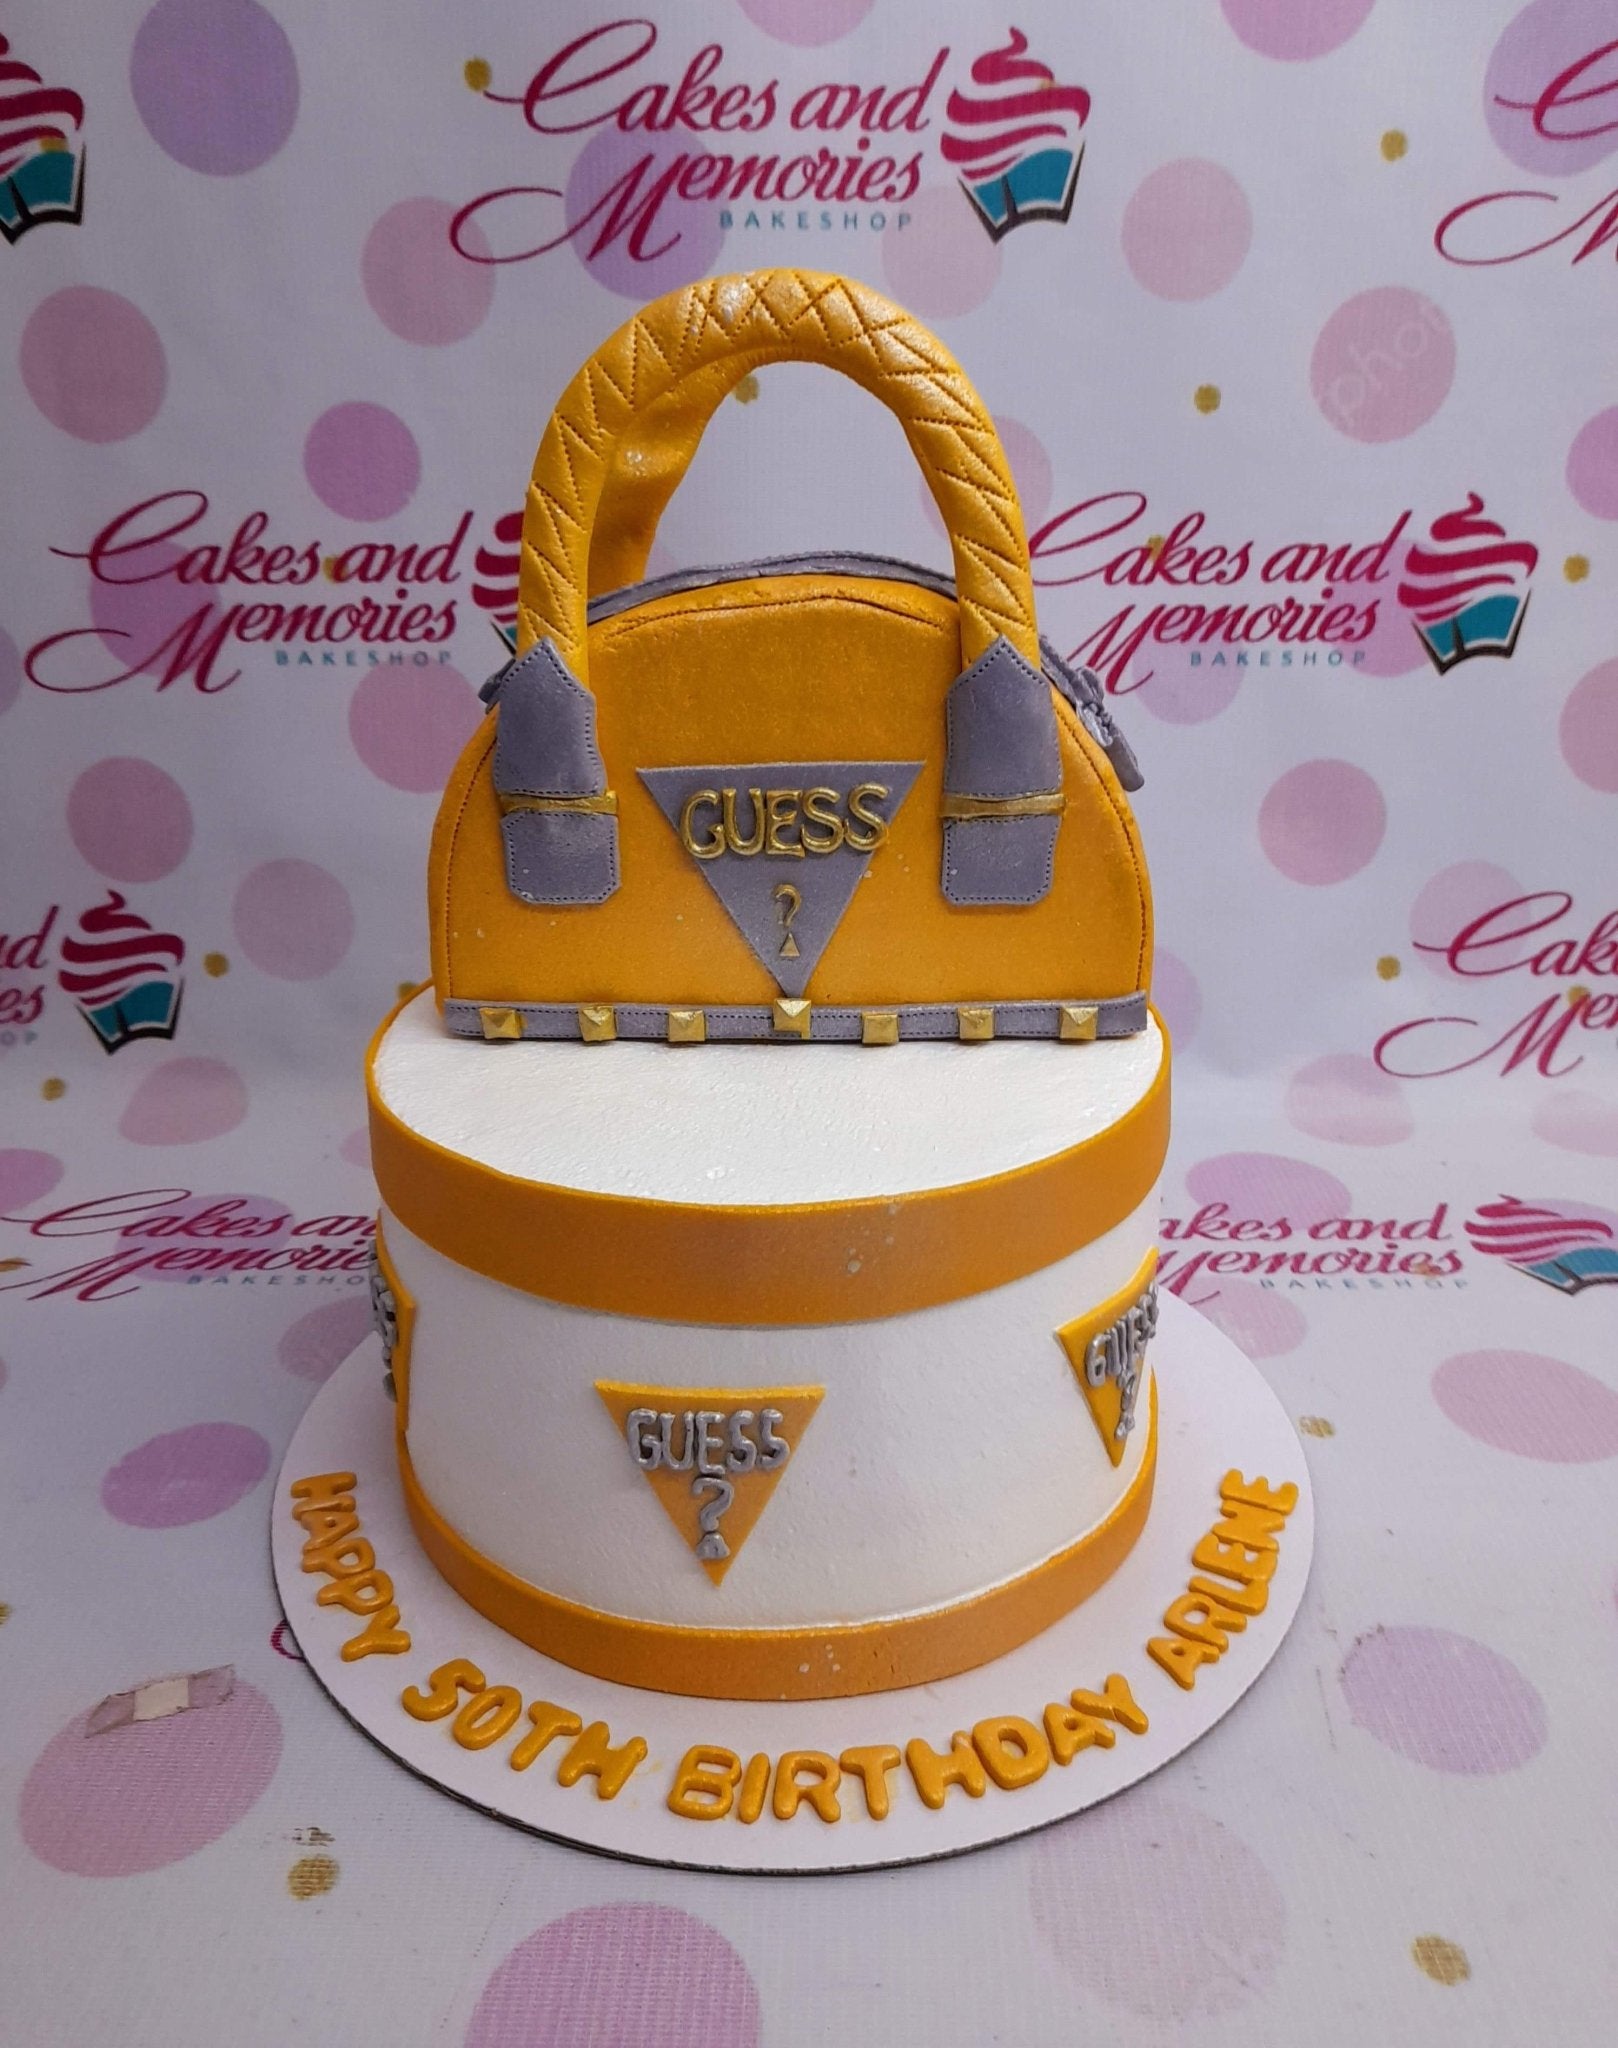 Bags Shoes Cake 1130 – Cakes And Memories Bakeshop, 54% OFF